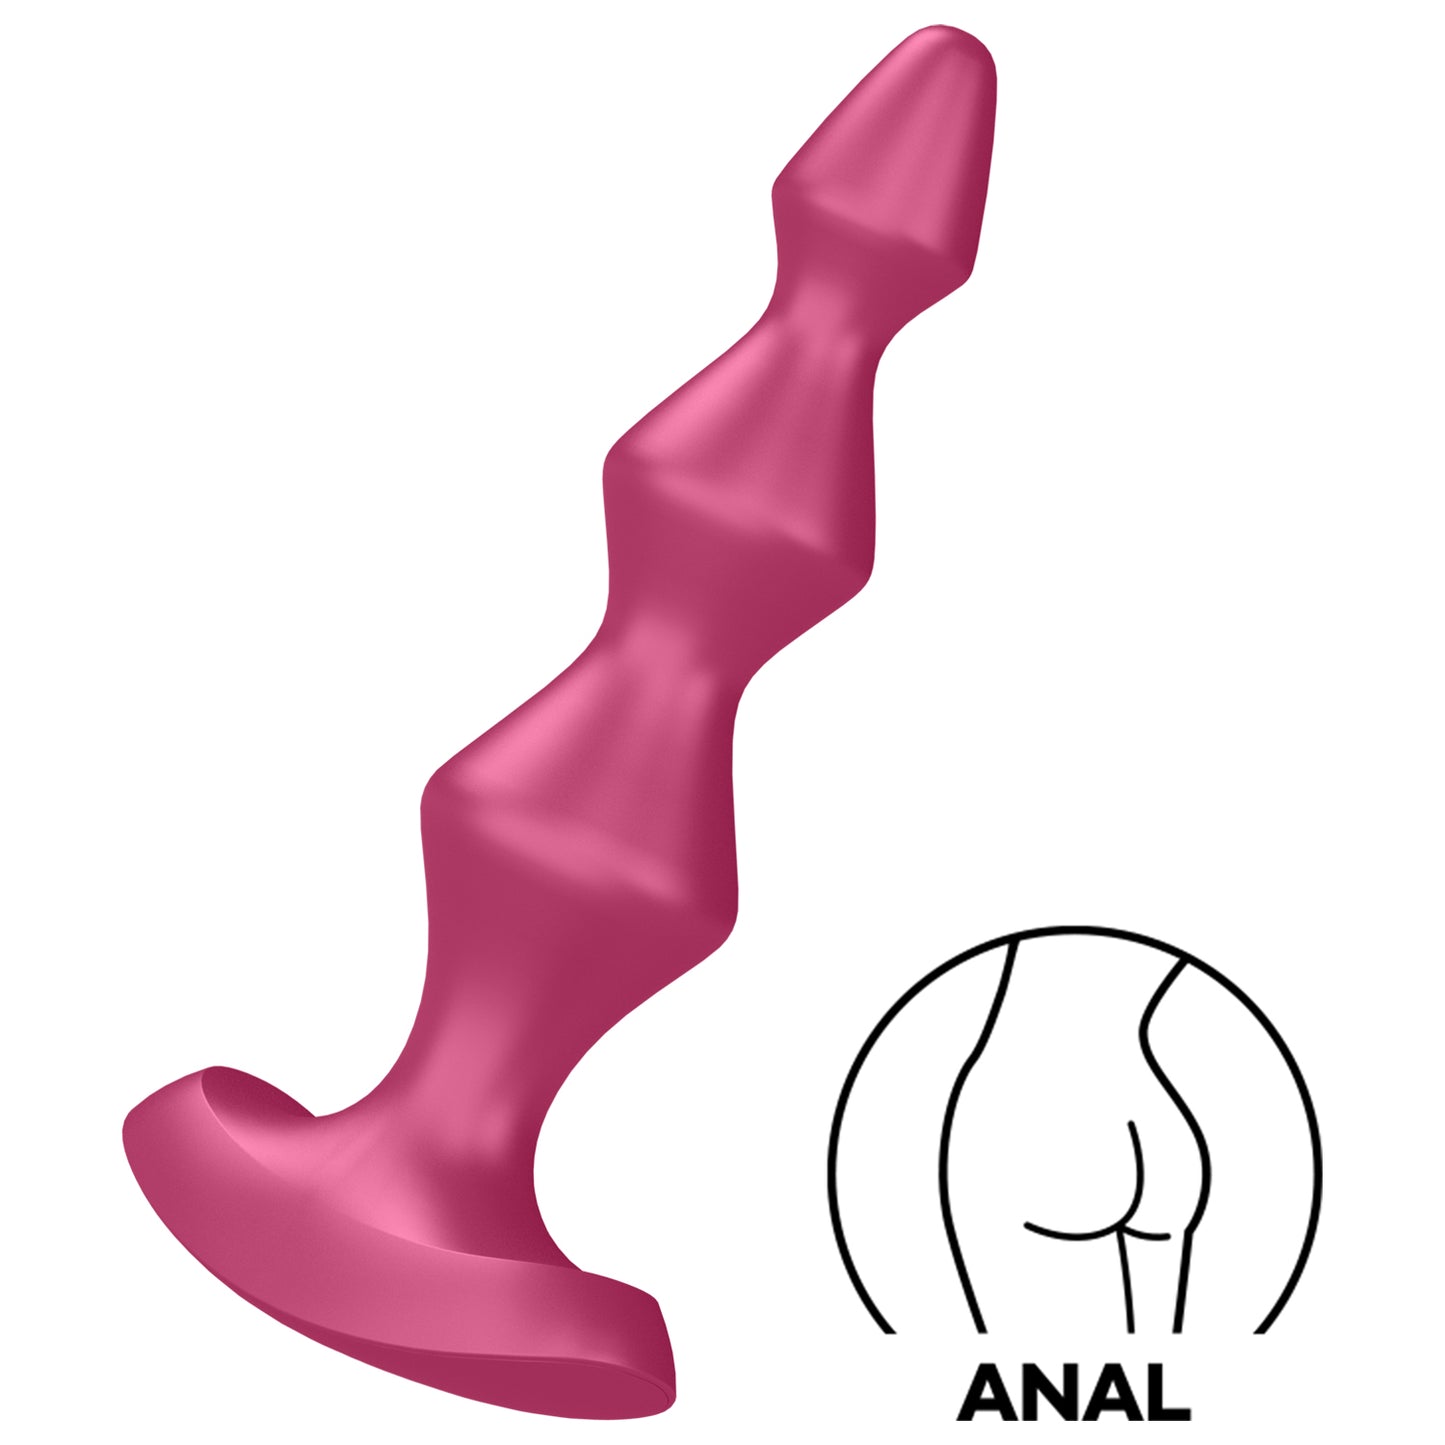 The Satisfyer Lolli Plug 1 Plug Vibrator and on the bottom right is an icon for ANAL.